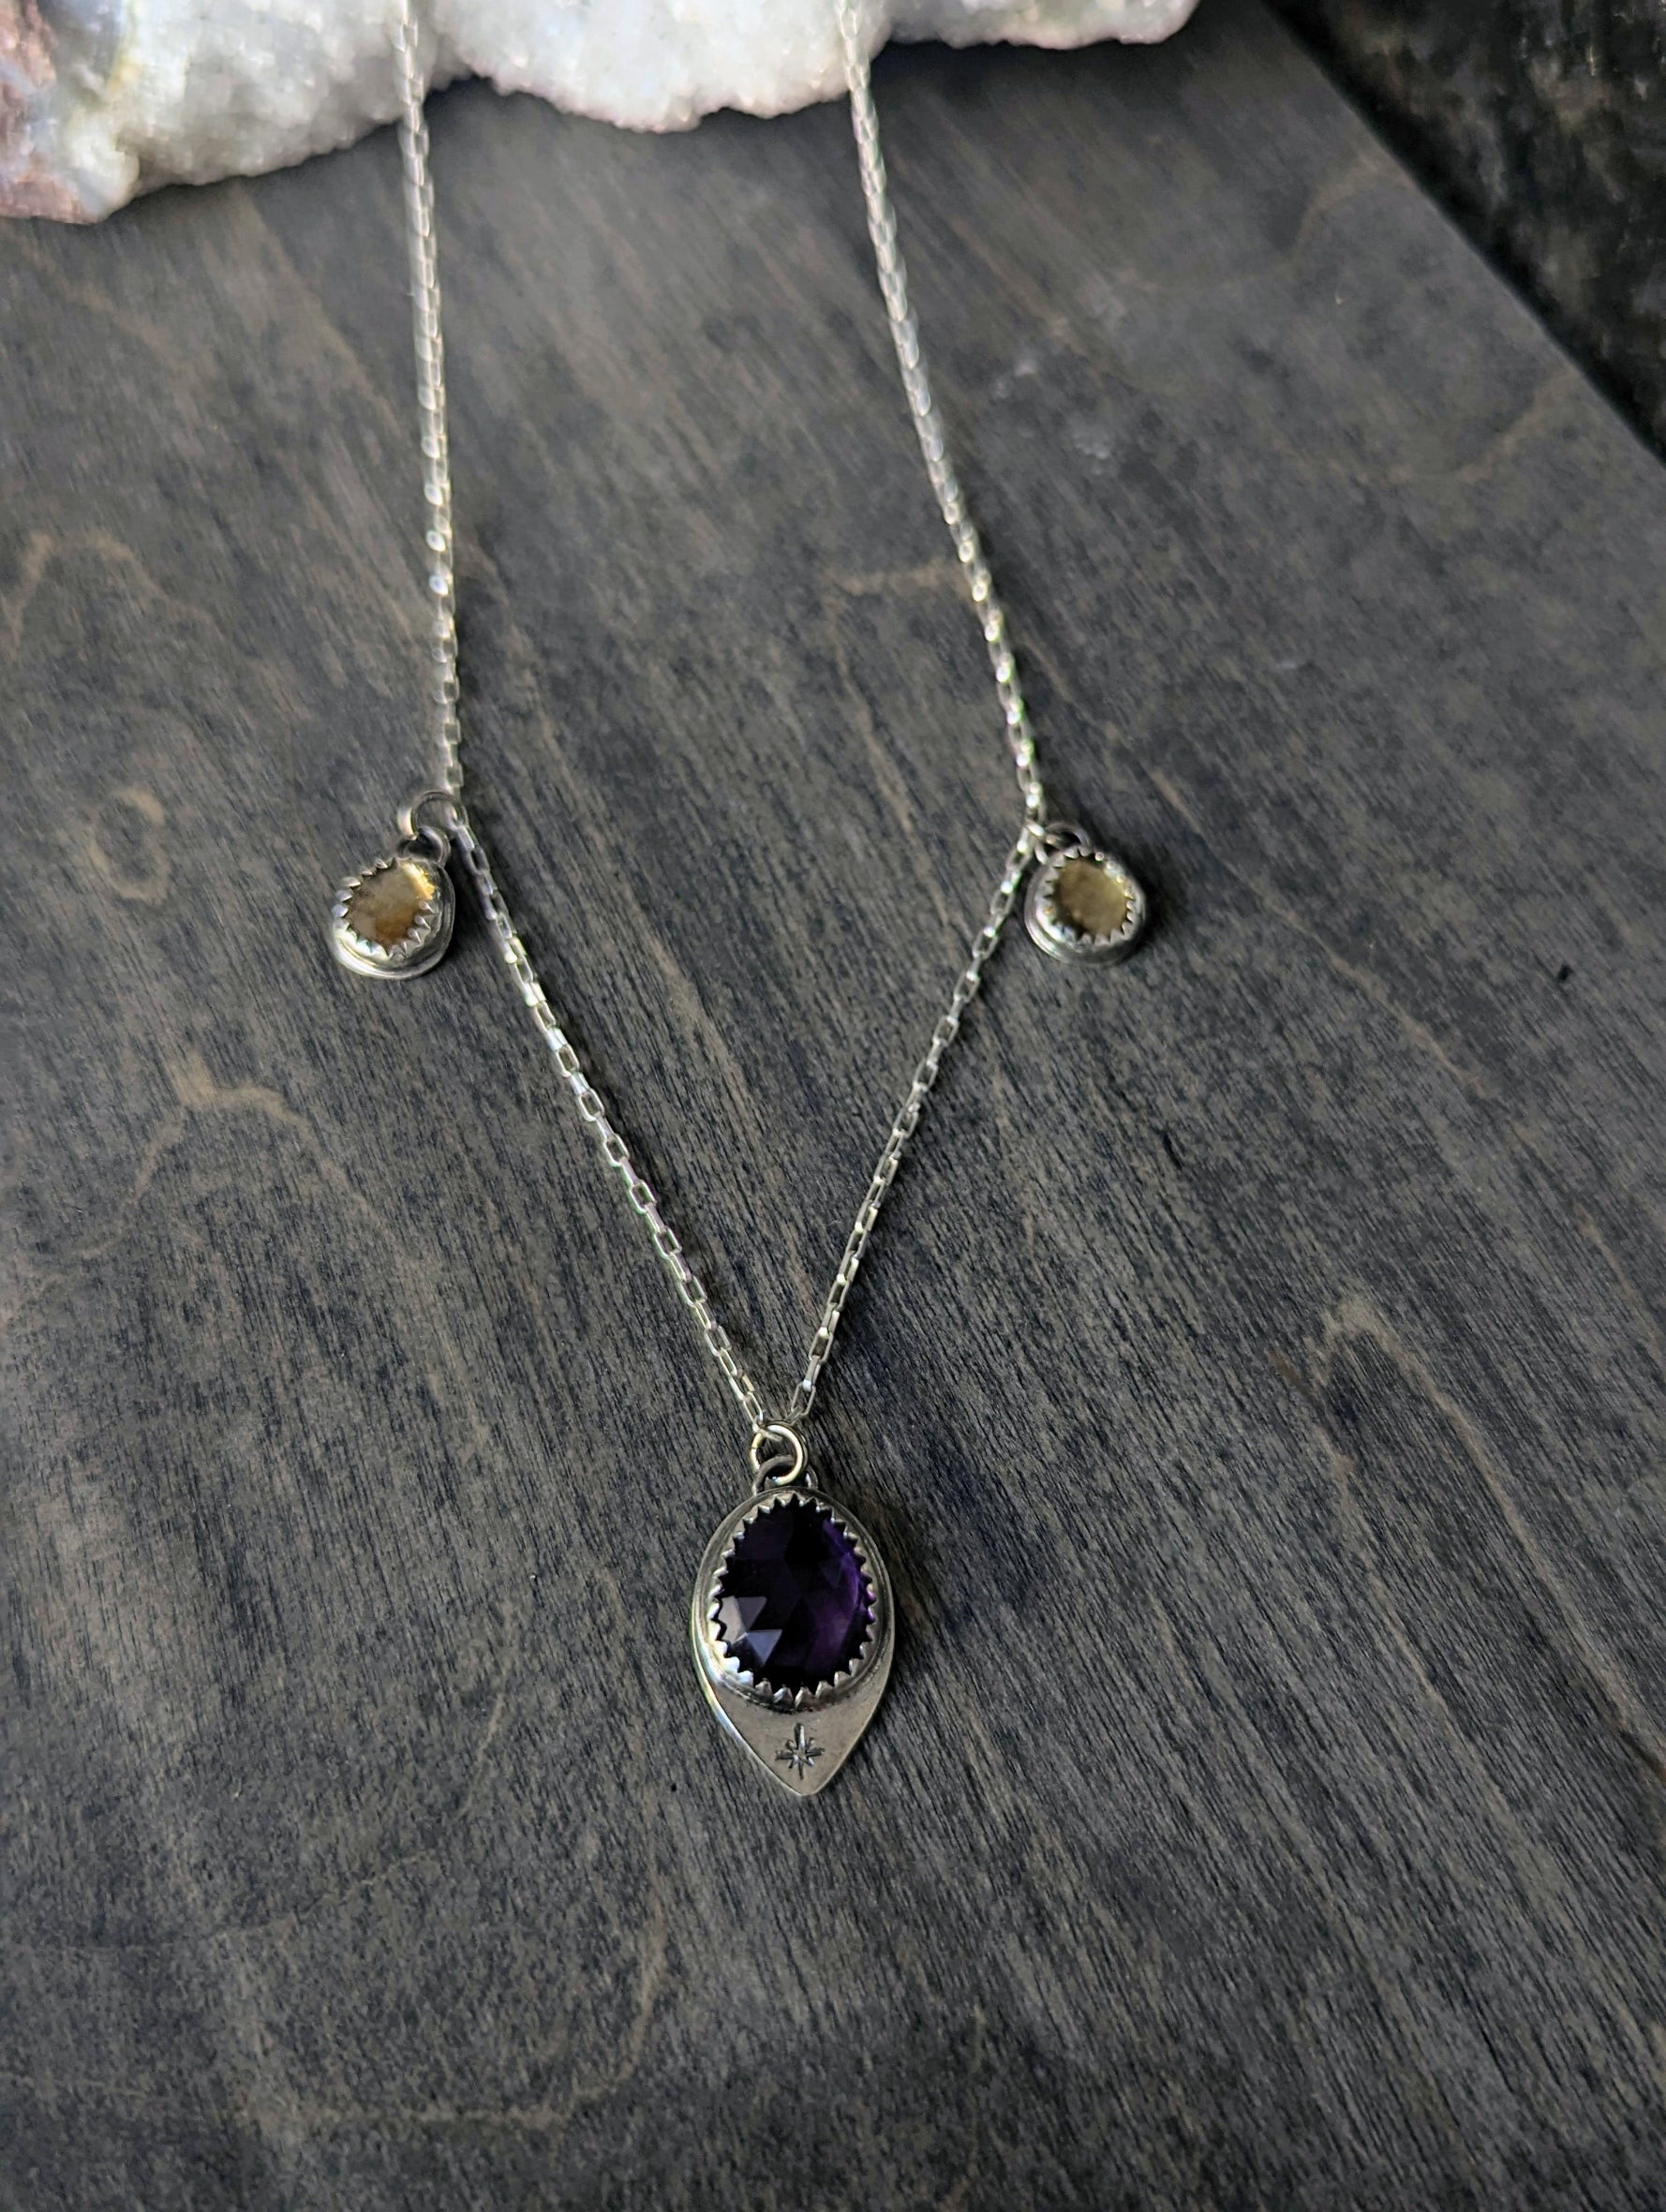 Amethyst and Citrine Necklace